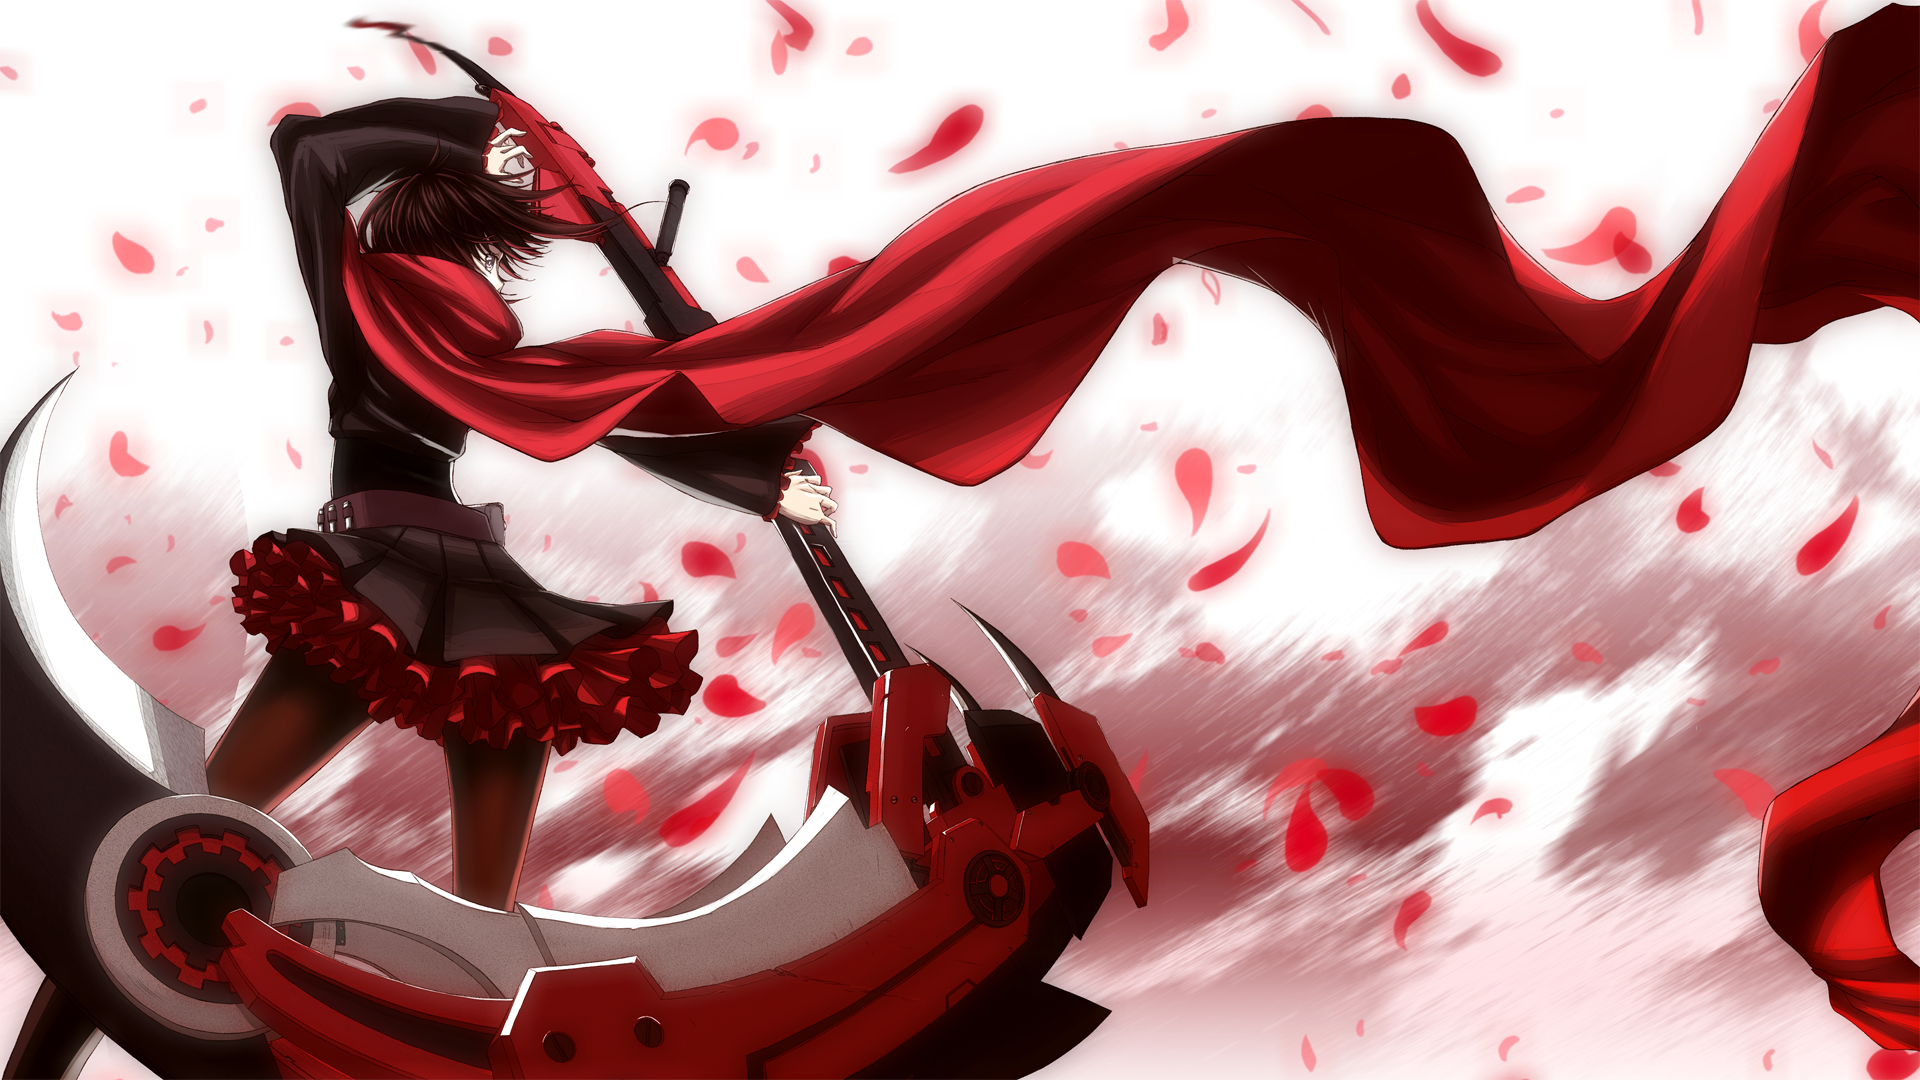 Rwby Hd Wallpaper Background Image 1920x1080 Id 670353 Wallpaper Abyss